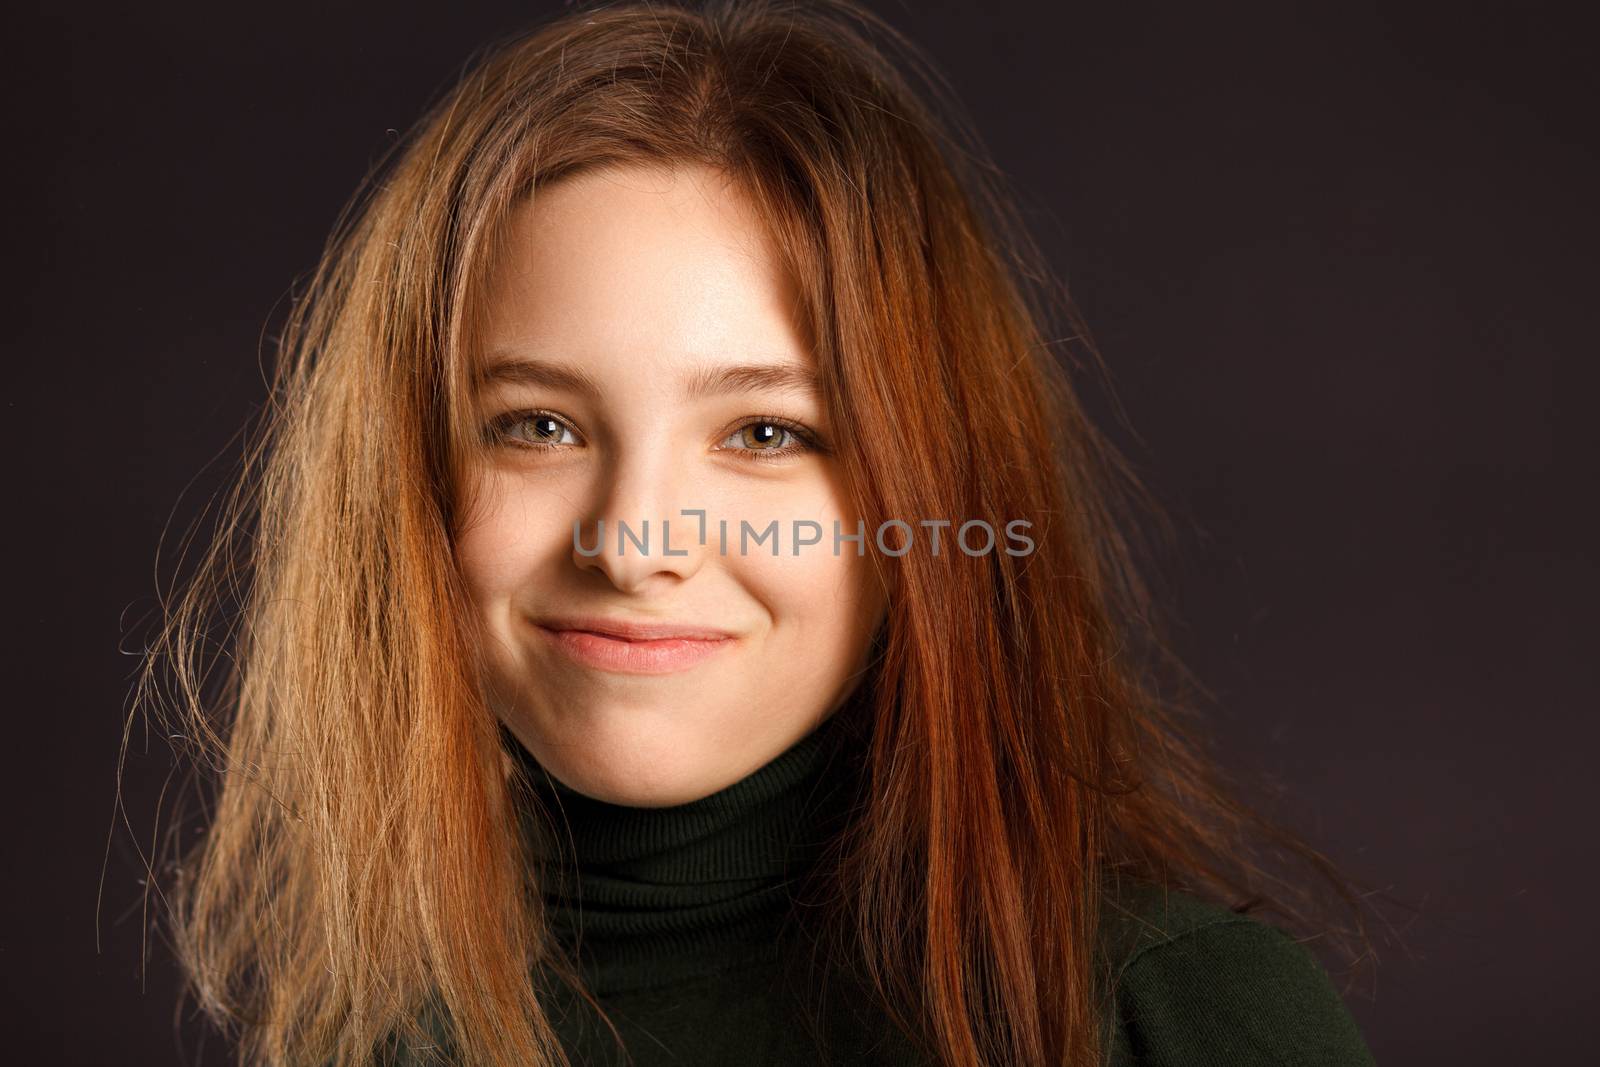 Closeup portrait of cute smiling redhead woman with disheveled hair on dark background